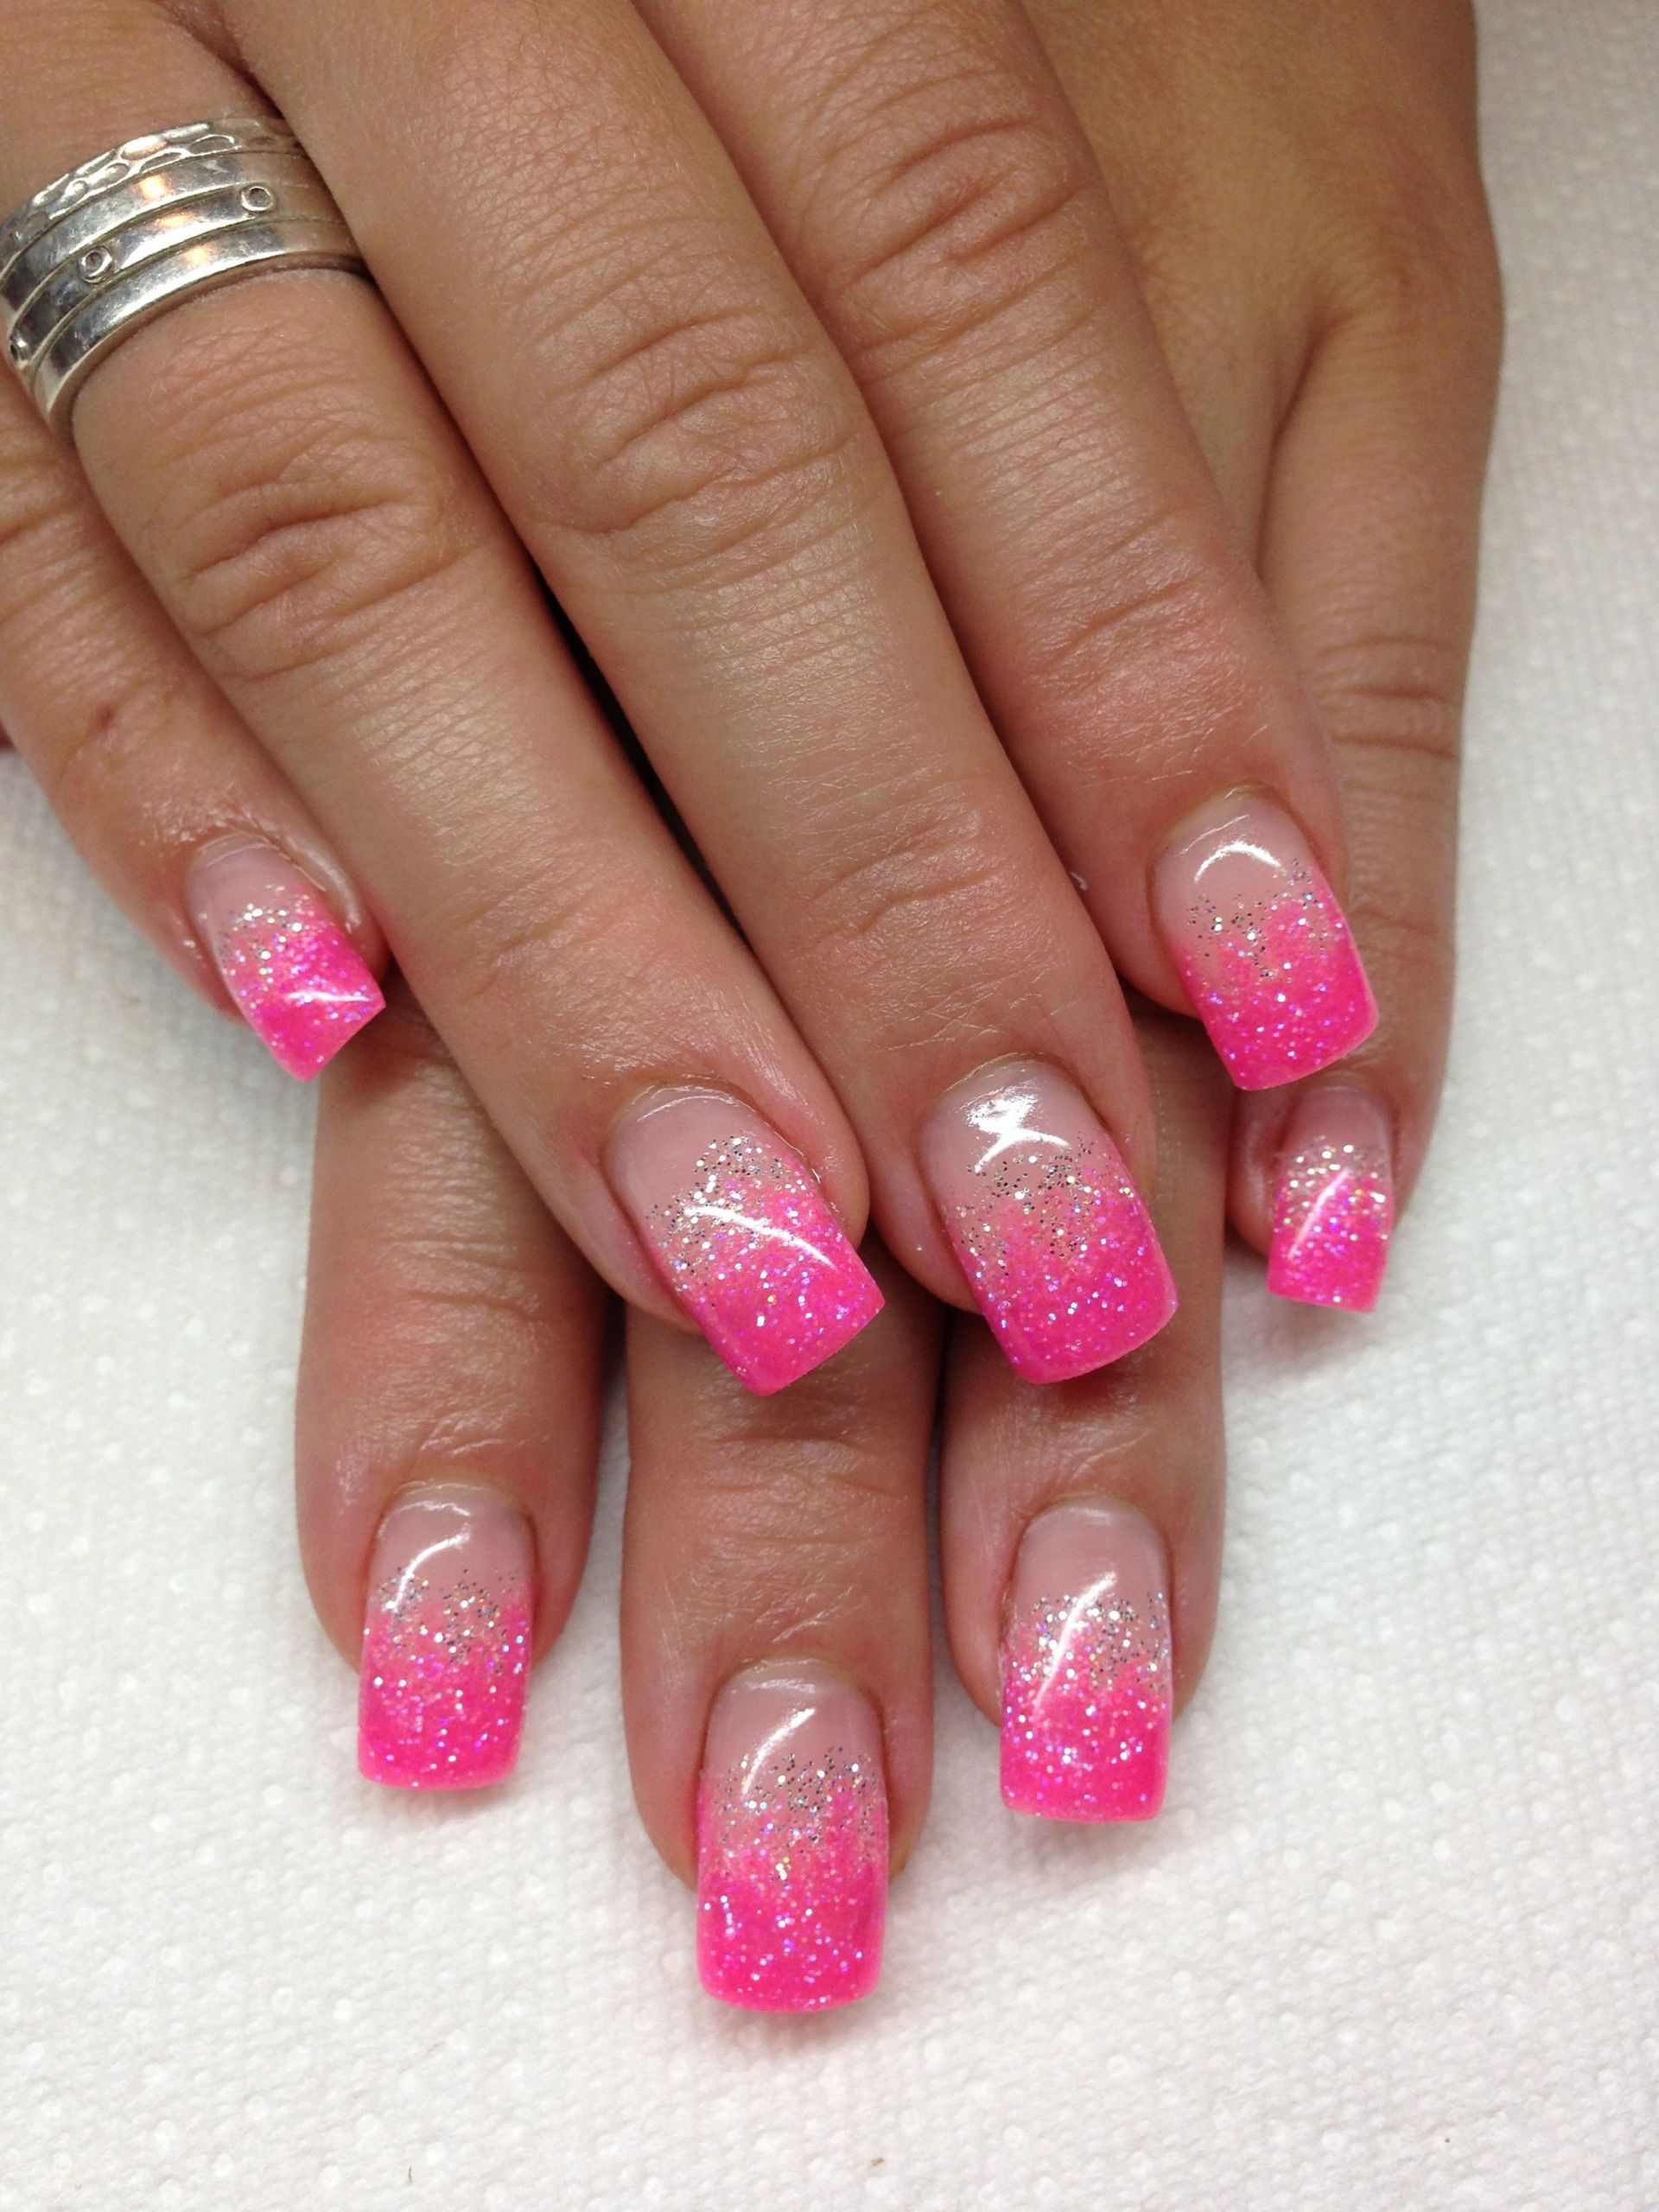 Gel Nails With Glitter Tips
 I love the pink and glitter tips